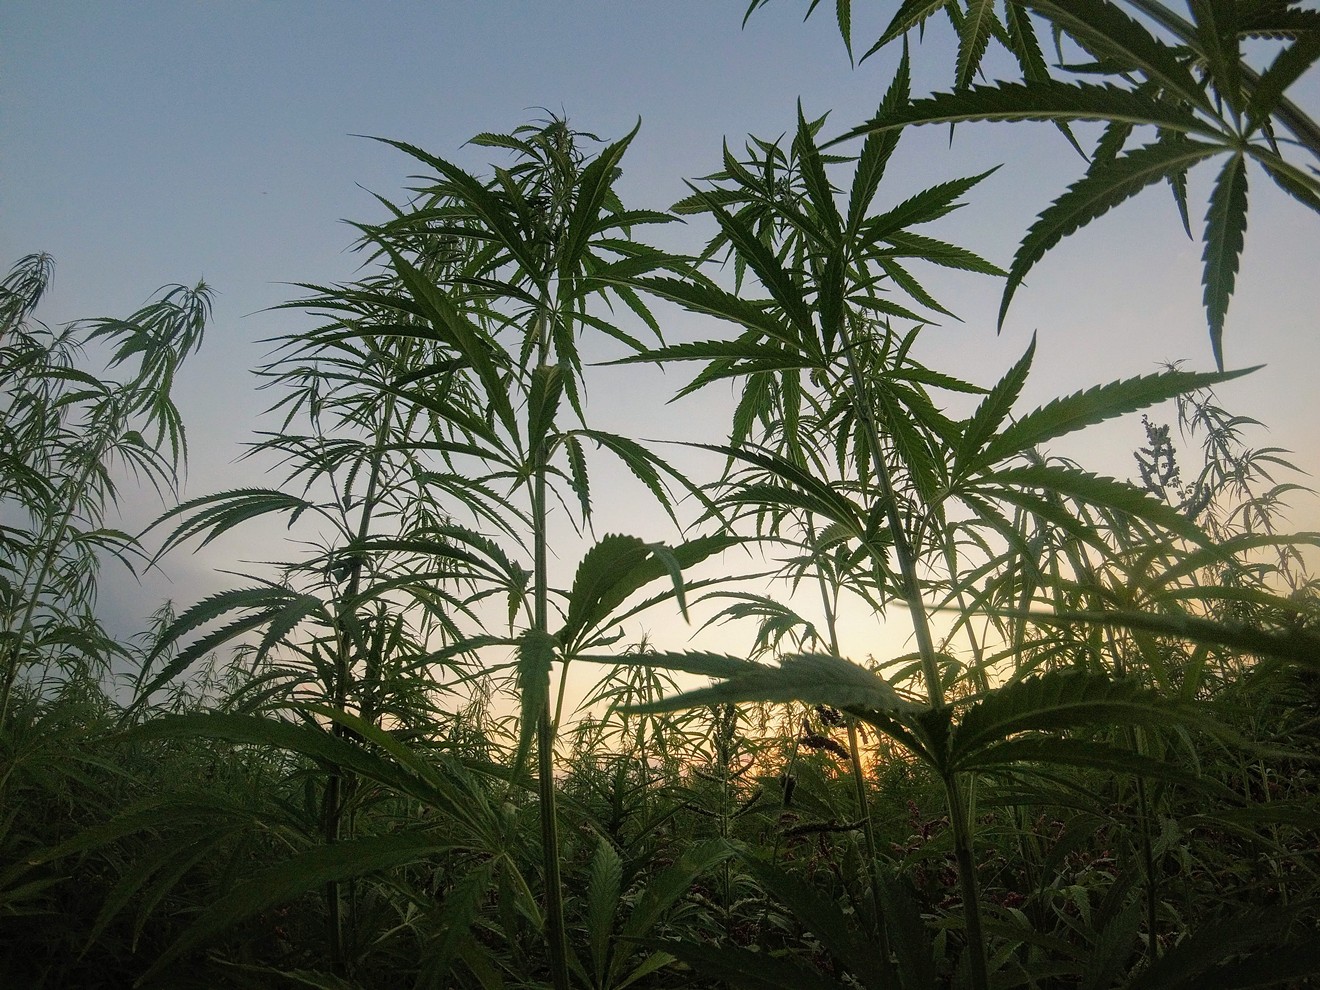 Black farmers are required to shell out $146,000 merely to apply for a license to grow medical marijuana.